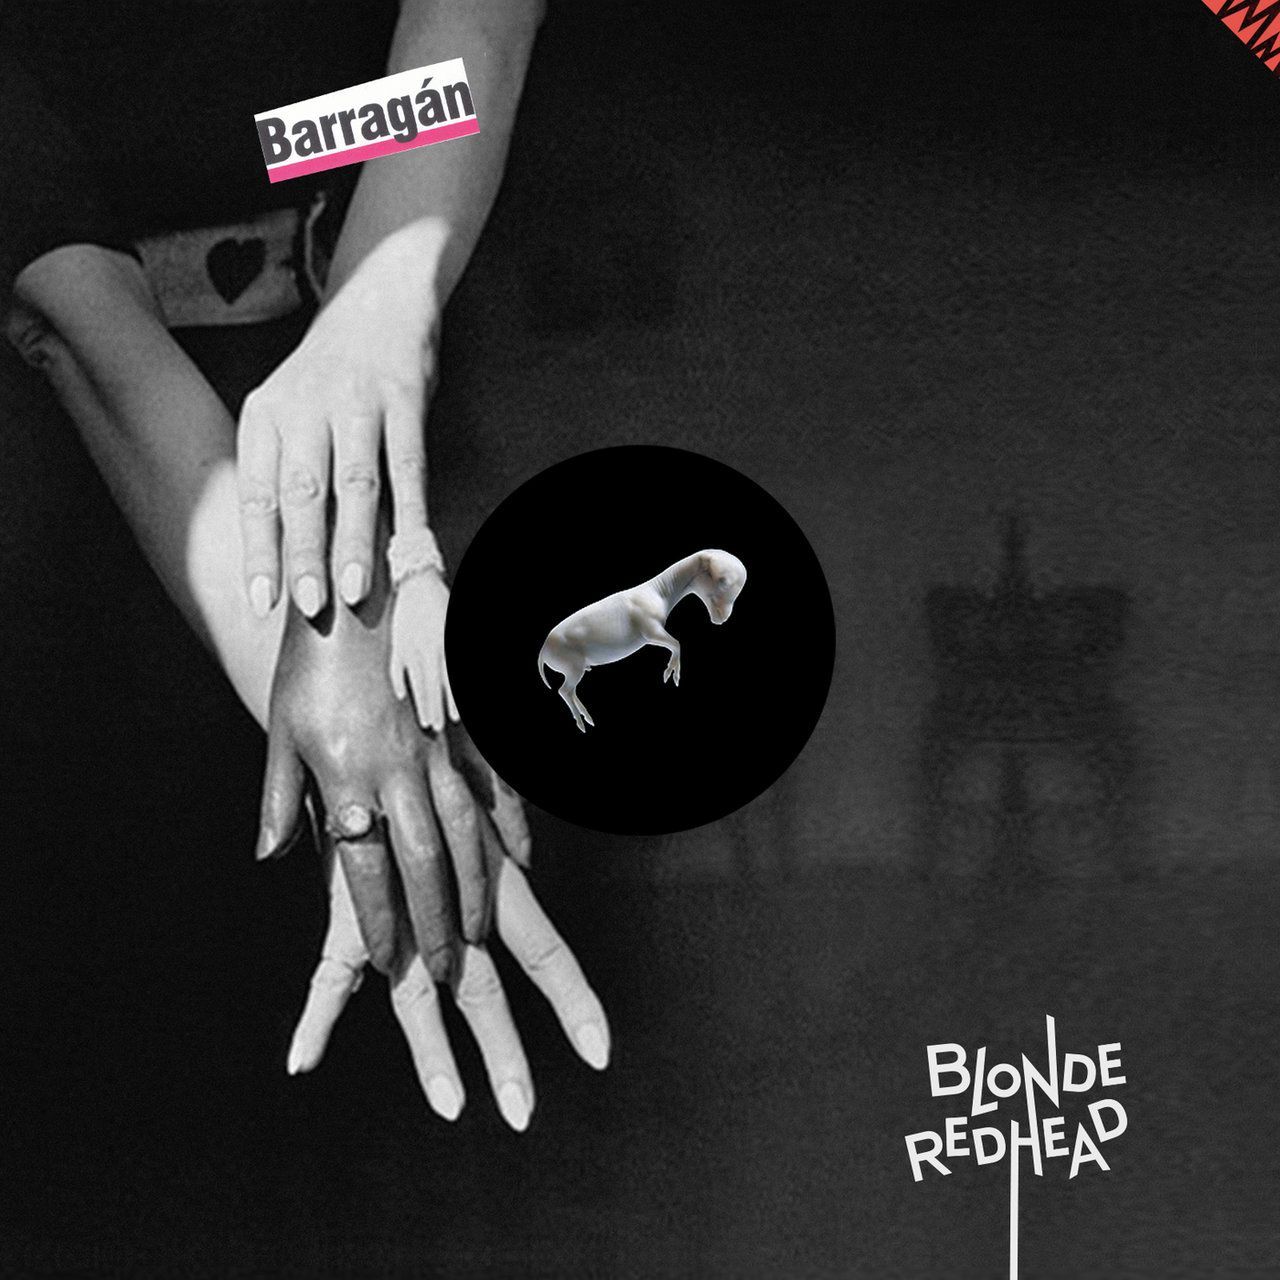 Hog reccomend Blonde redhead the secret society of butterflies